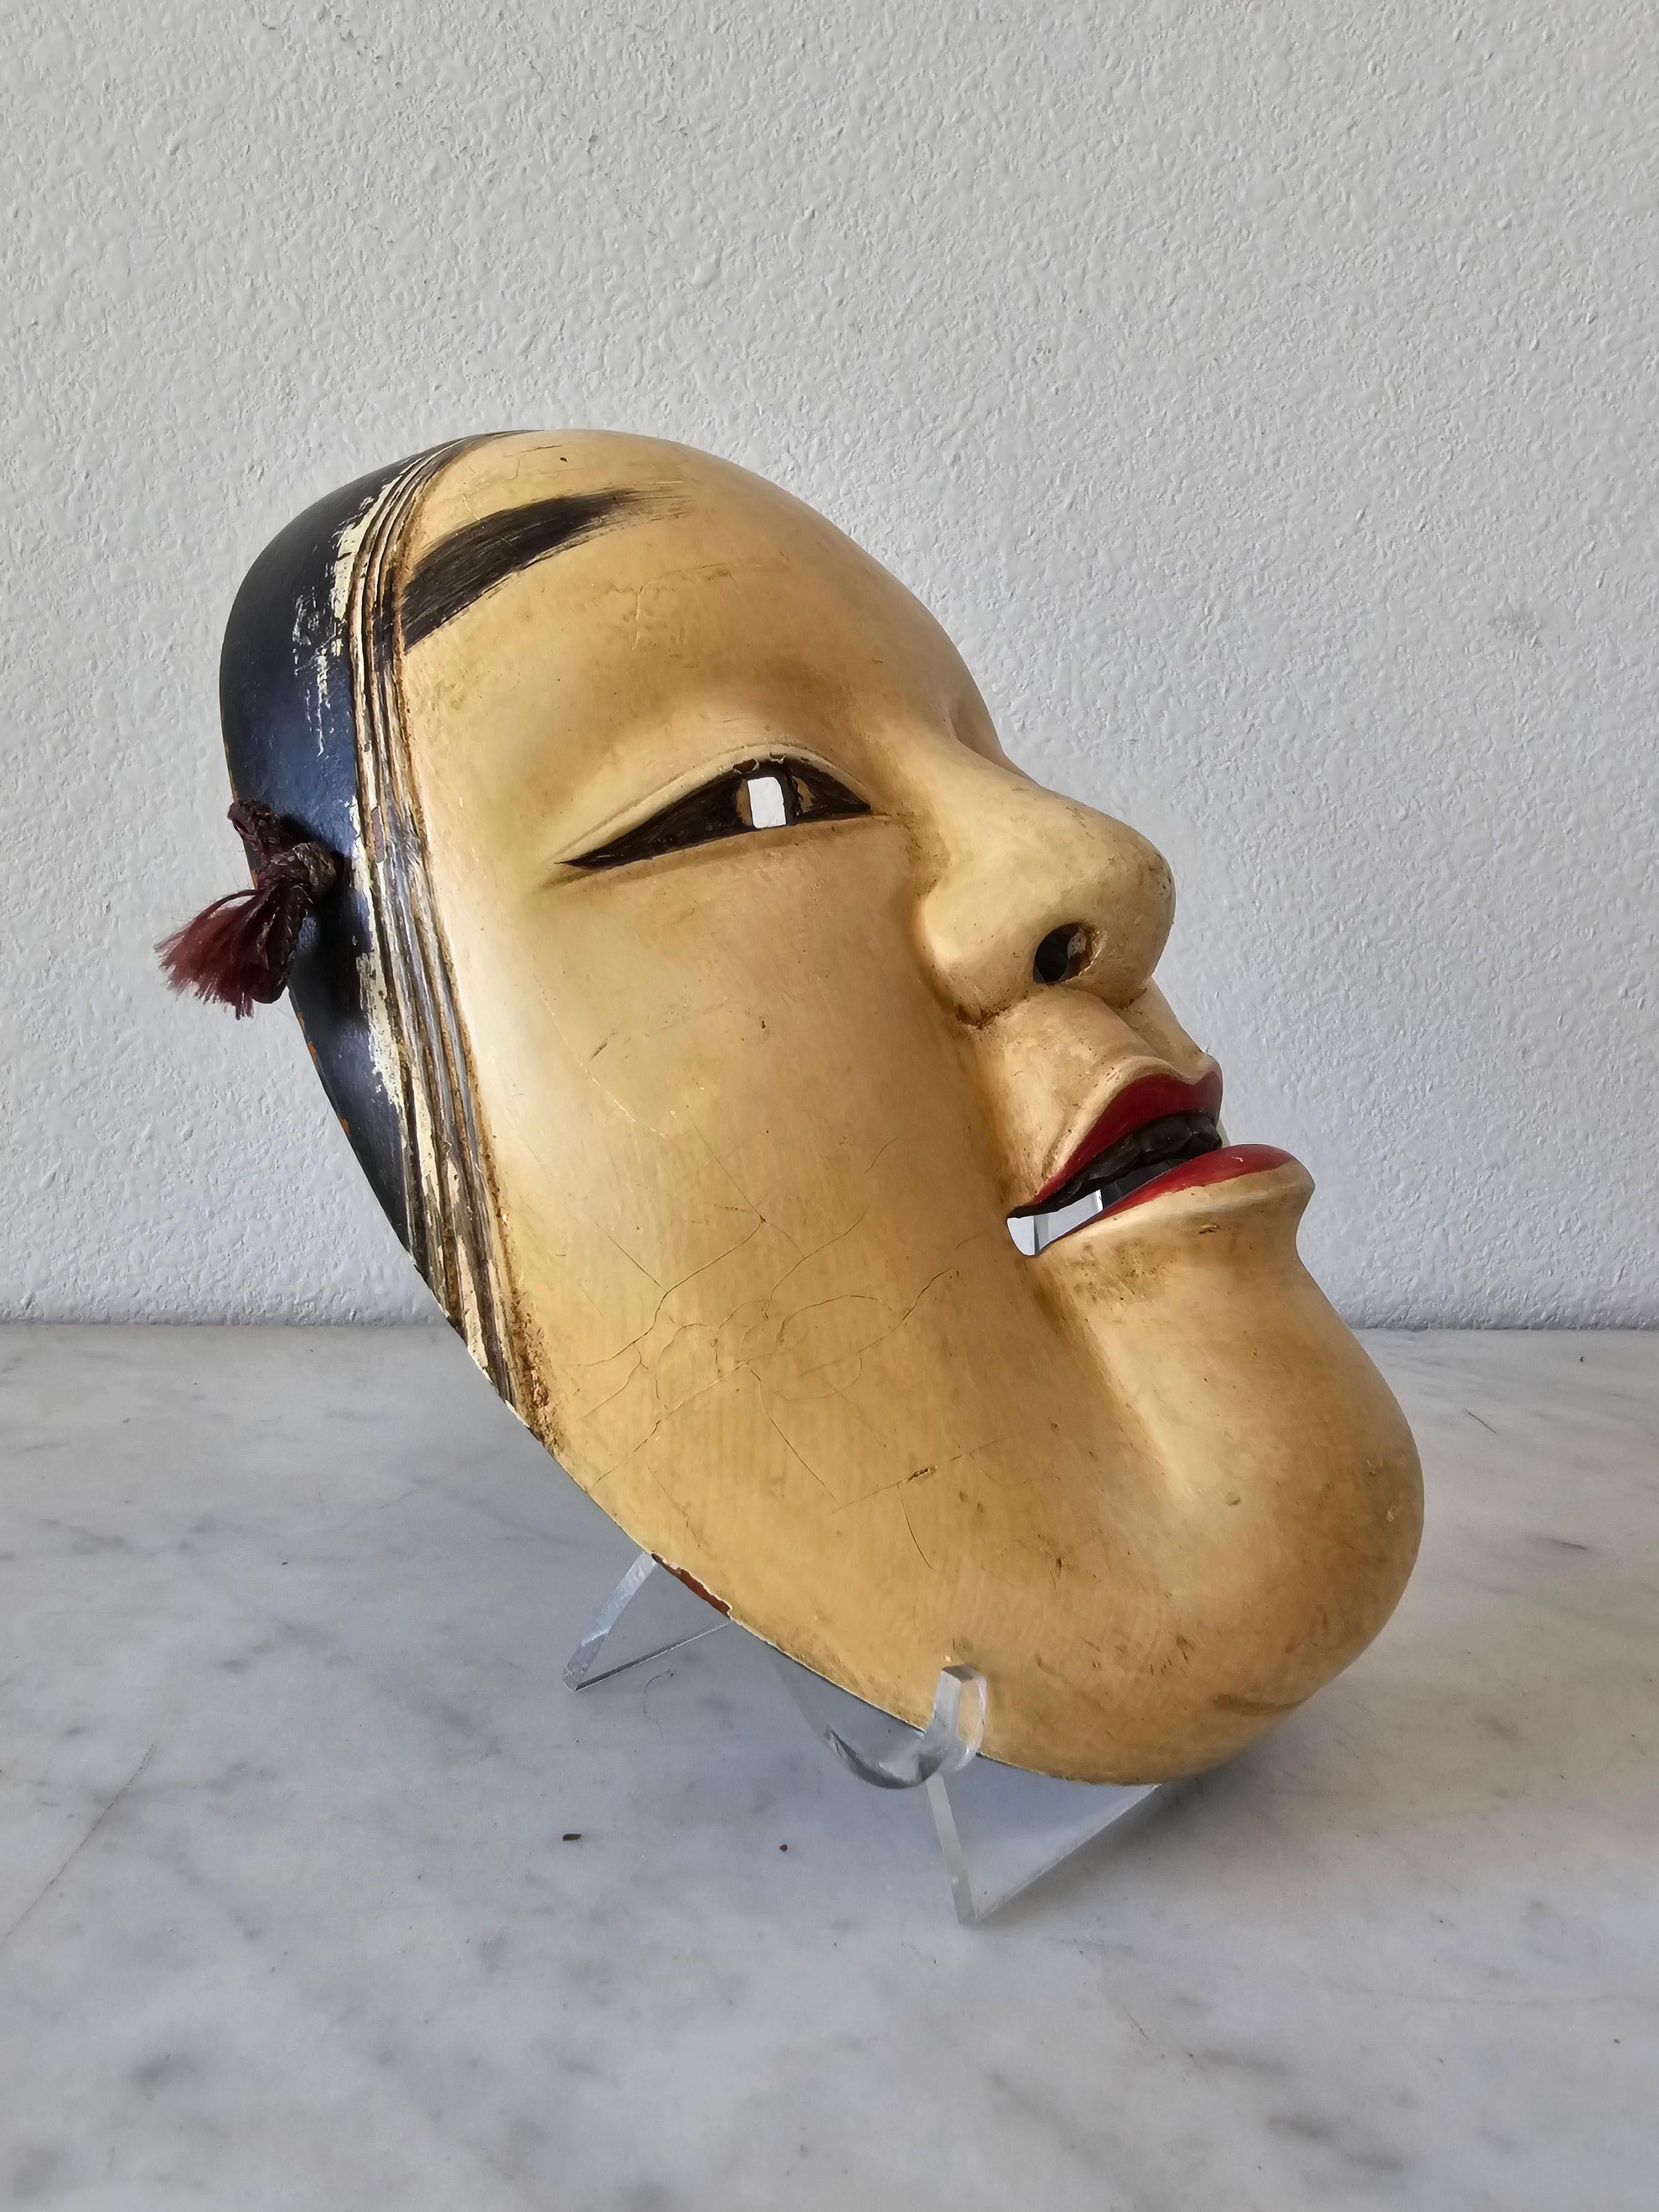 A scarce antique Japanese Noh theatre hand carved and painted wooden mask of Ko-Omote.

Sculpted in Japan in the 19th century, Ko-omote (literally “small face”) Noh masks are used for main or secondary theatrical roles, of either a young girl or a